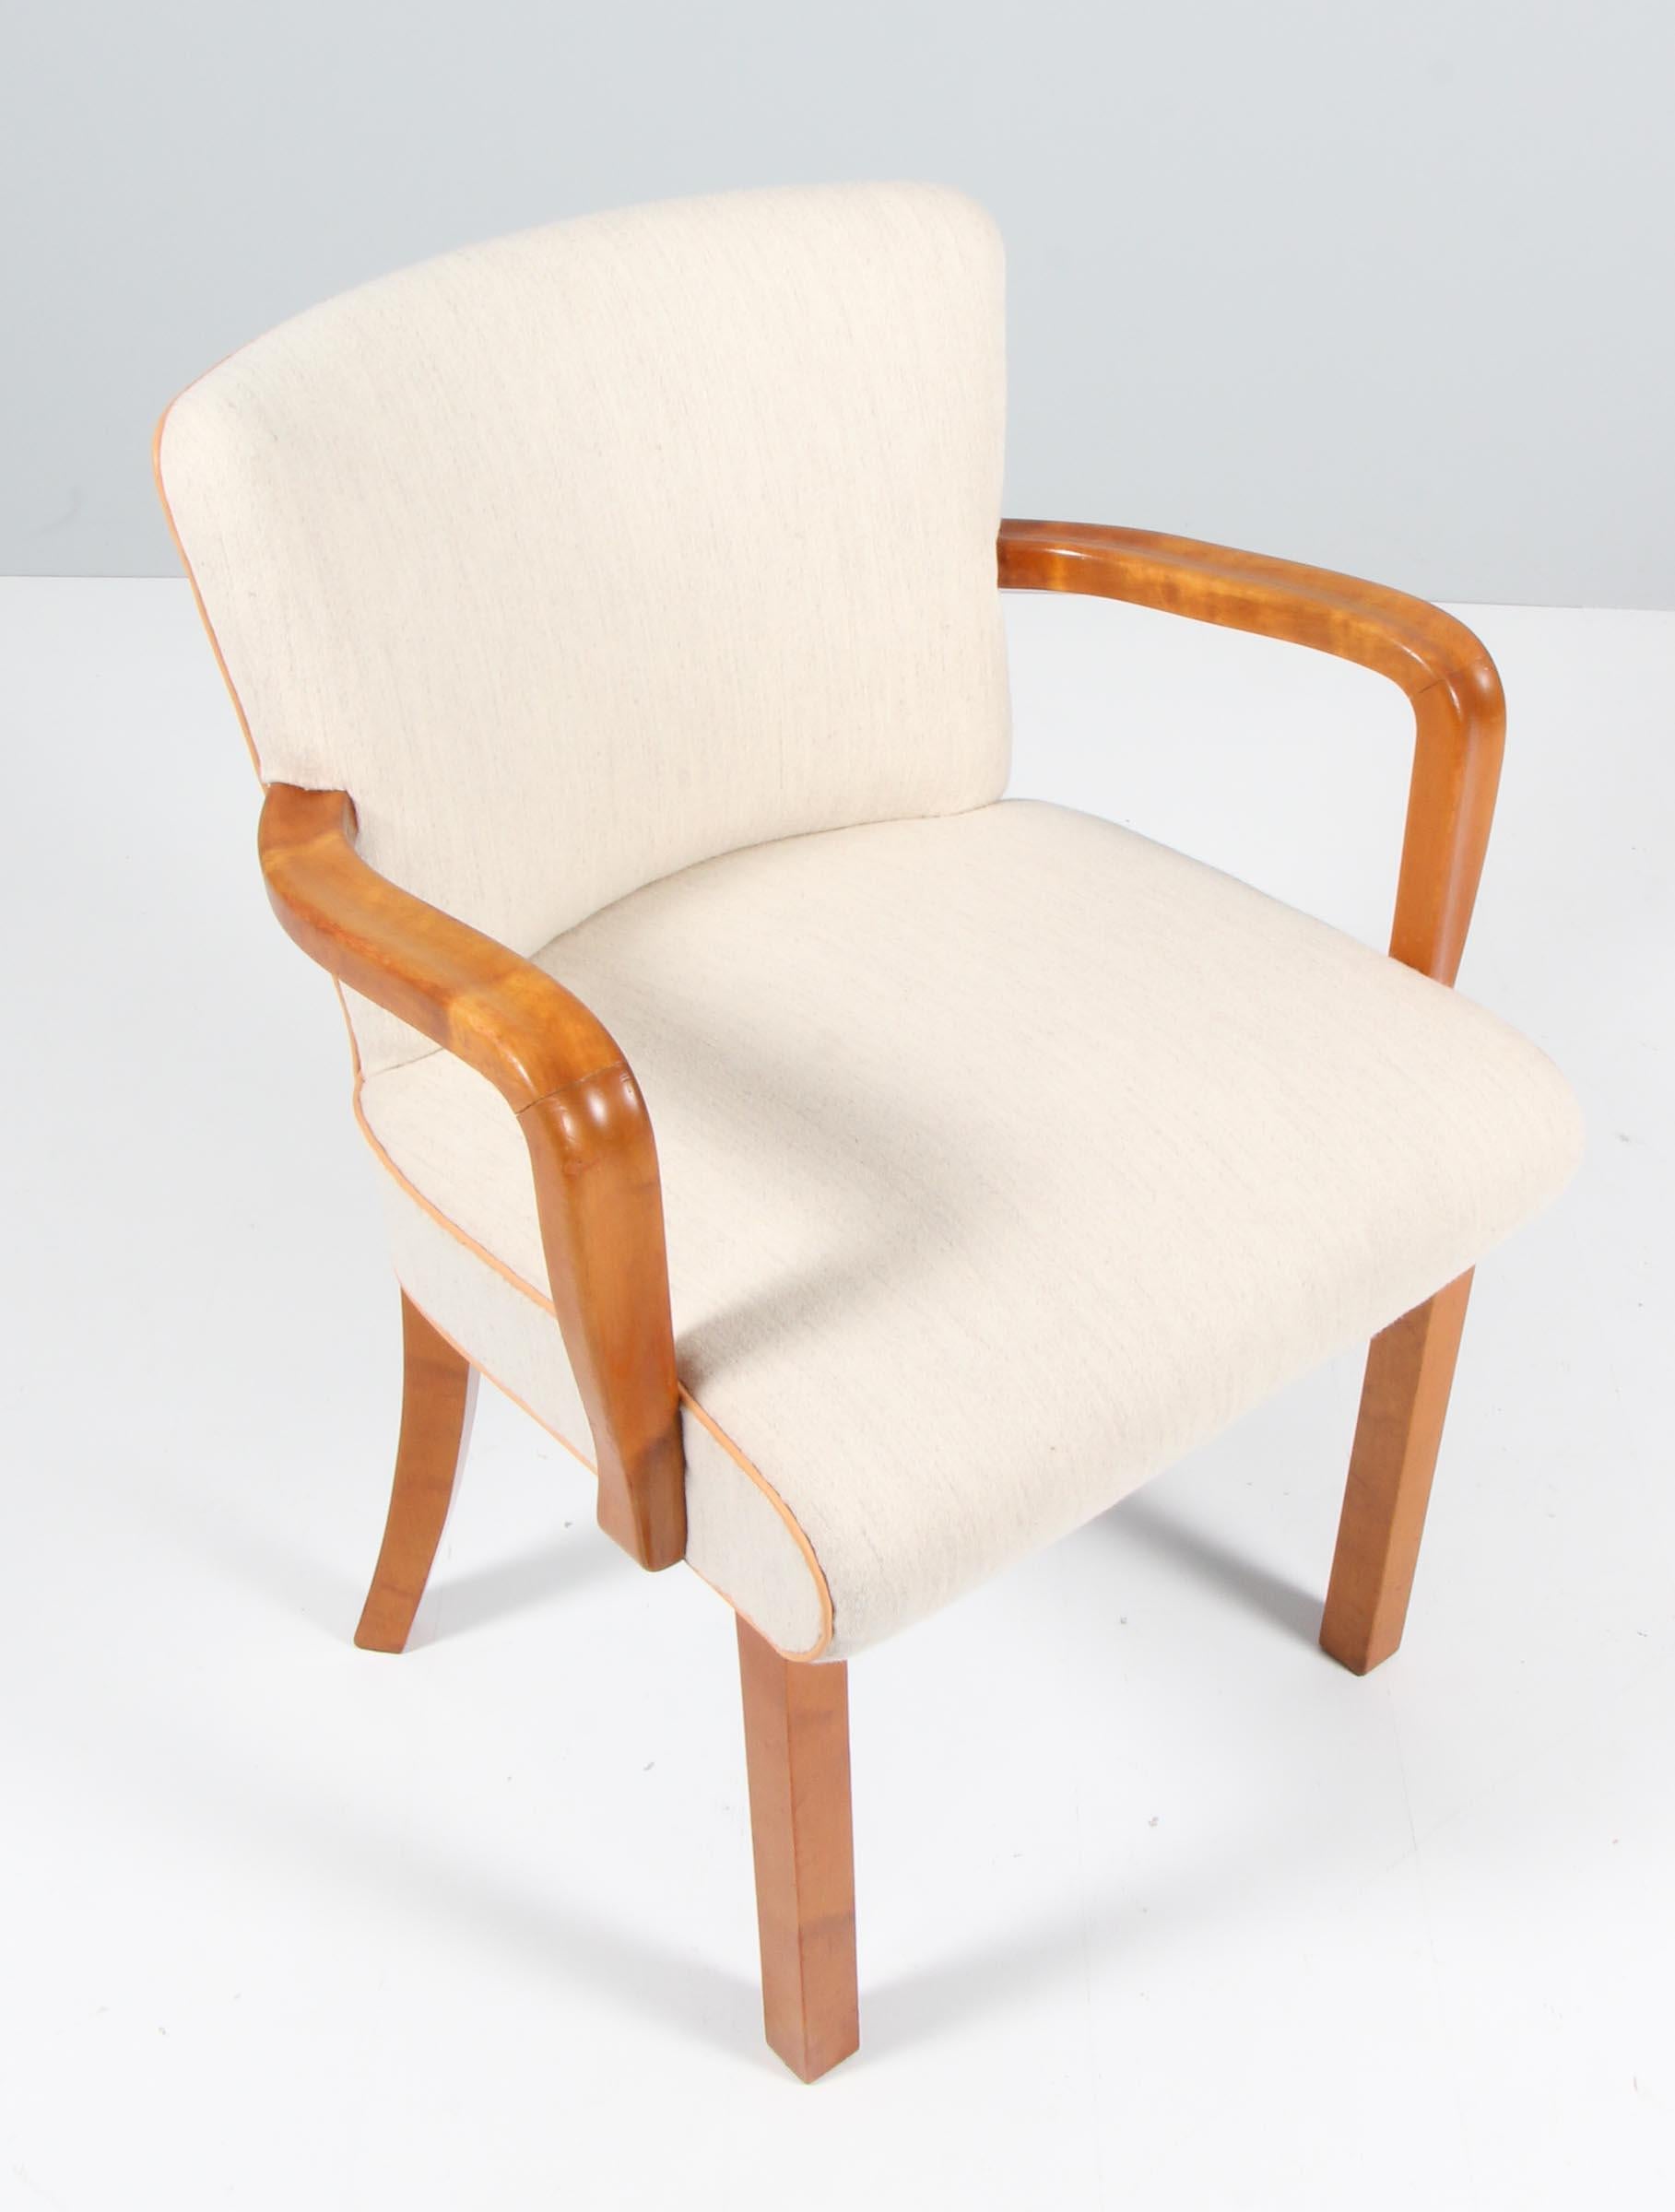 Tove Reddersen armchair made of fruittree, upholstered with white savak wool fabric, nature leather tubings.

Made in Denmark in the 1930s.